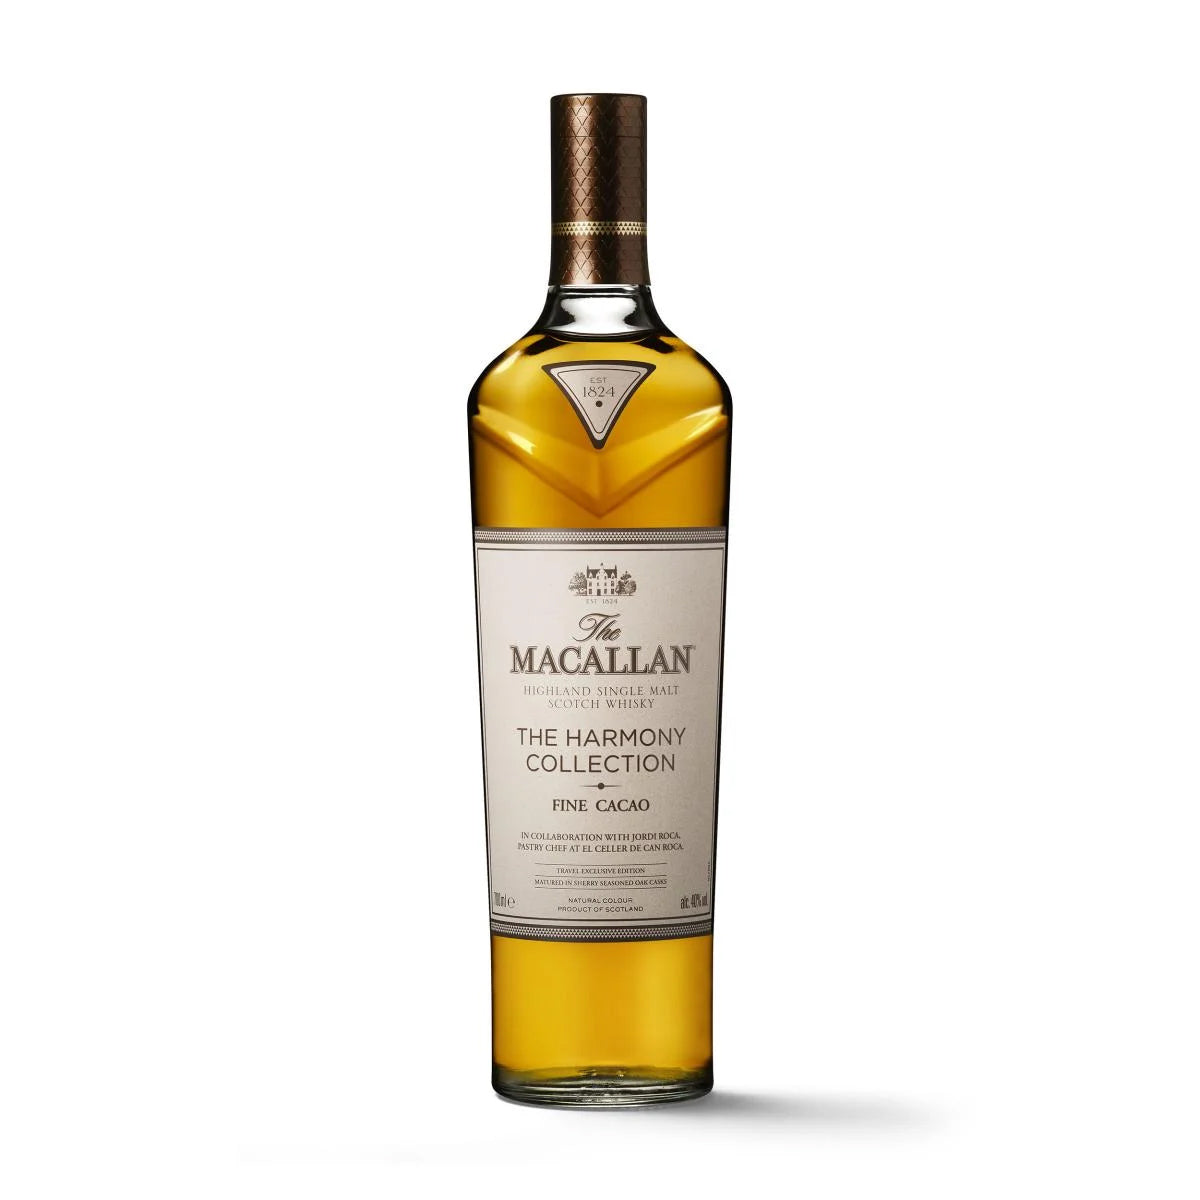 Macallan The Full Harmony Collection of whisky